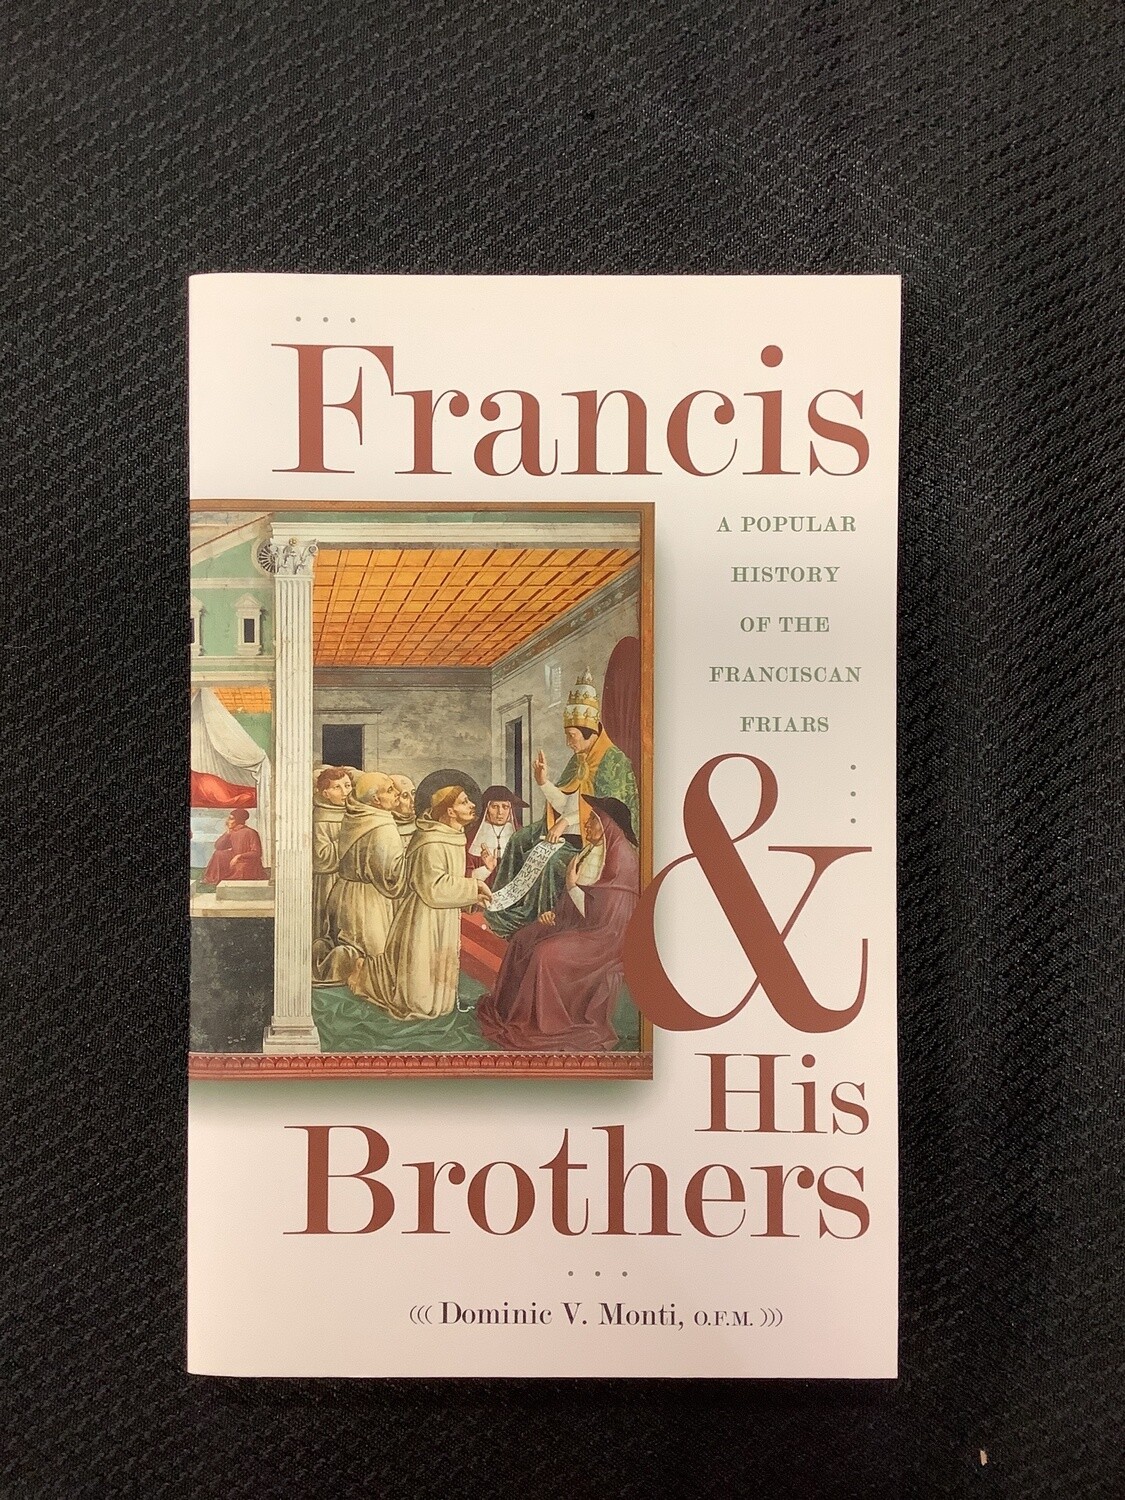 Francis & His Brothers A Popular History of the Franciscan Friars - Dominic V. Monti, O.F.M.